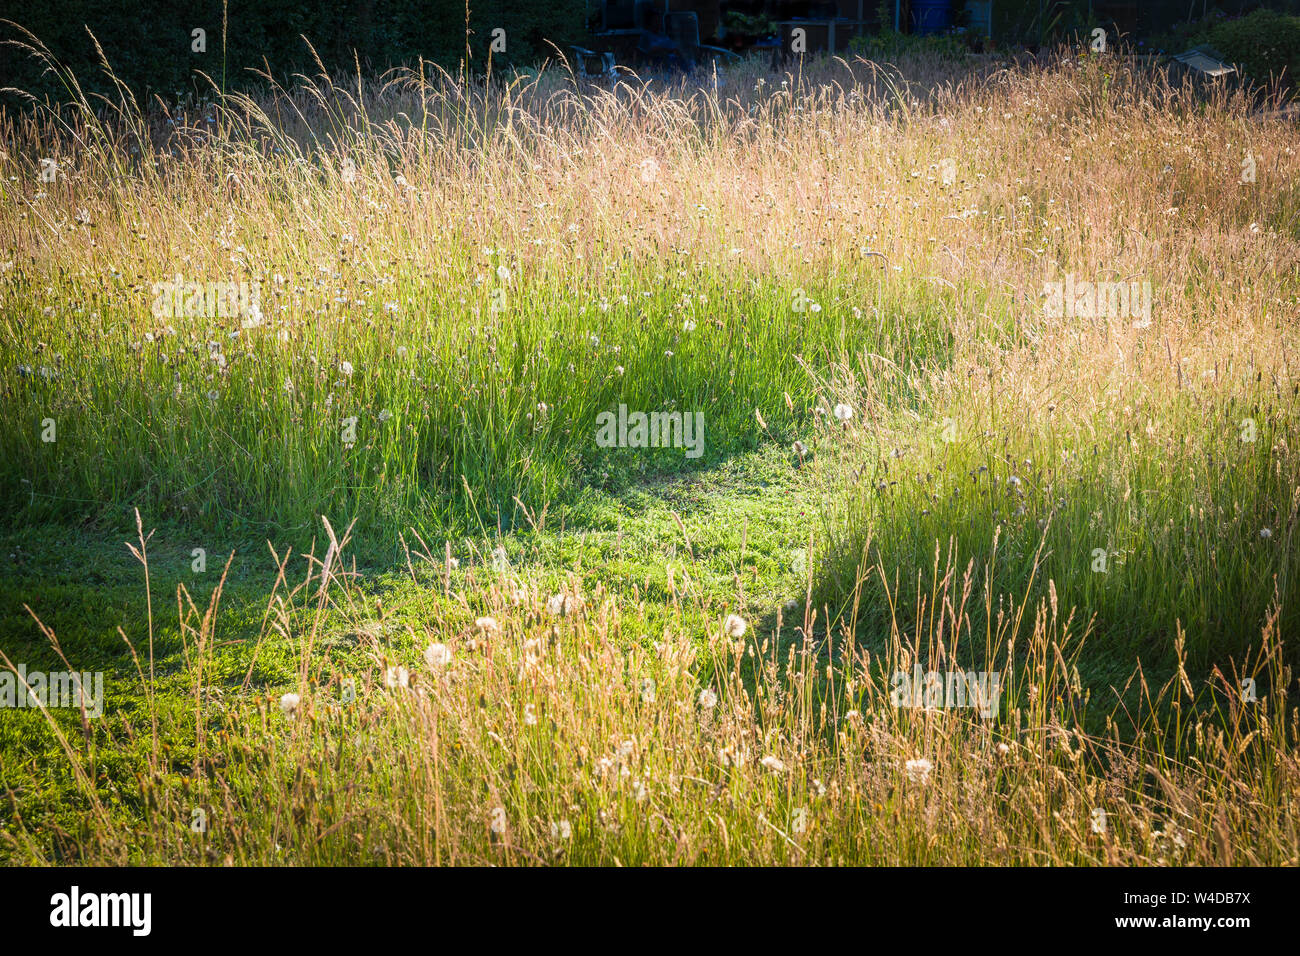 A lawn grass allowed to grow long during summer to provide wildlife habitat and green path access in an English garden in July Stock Photo